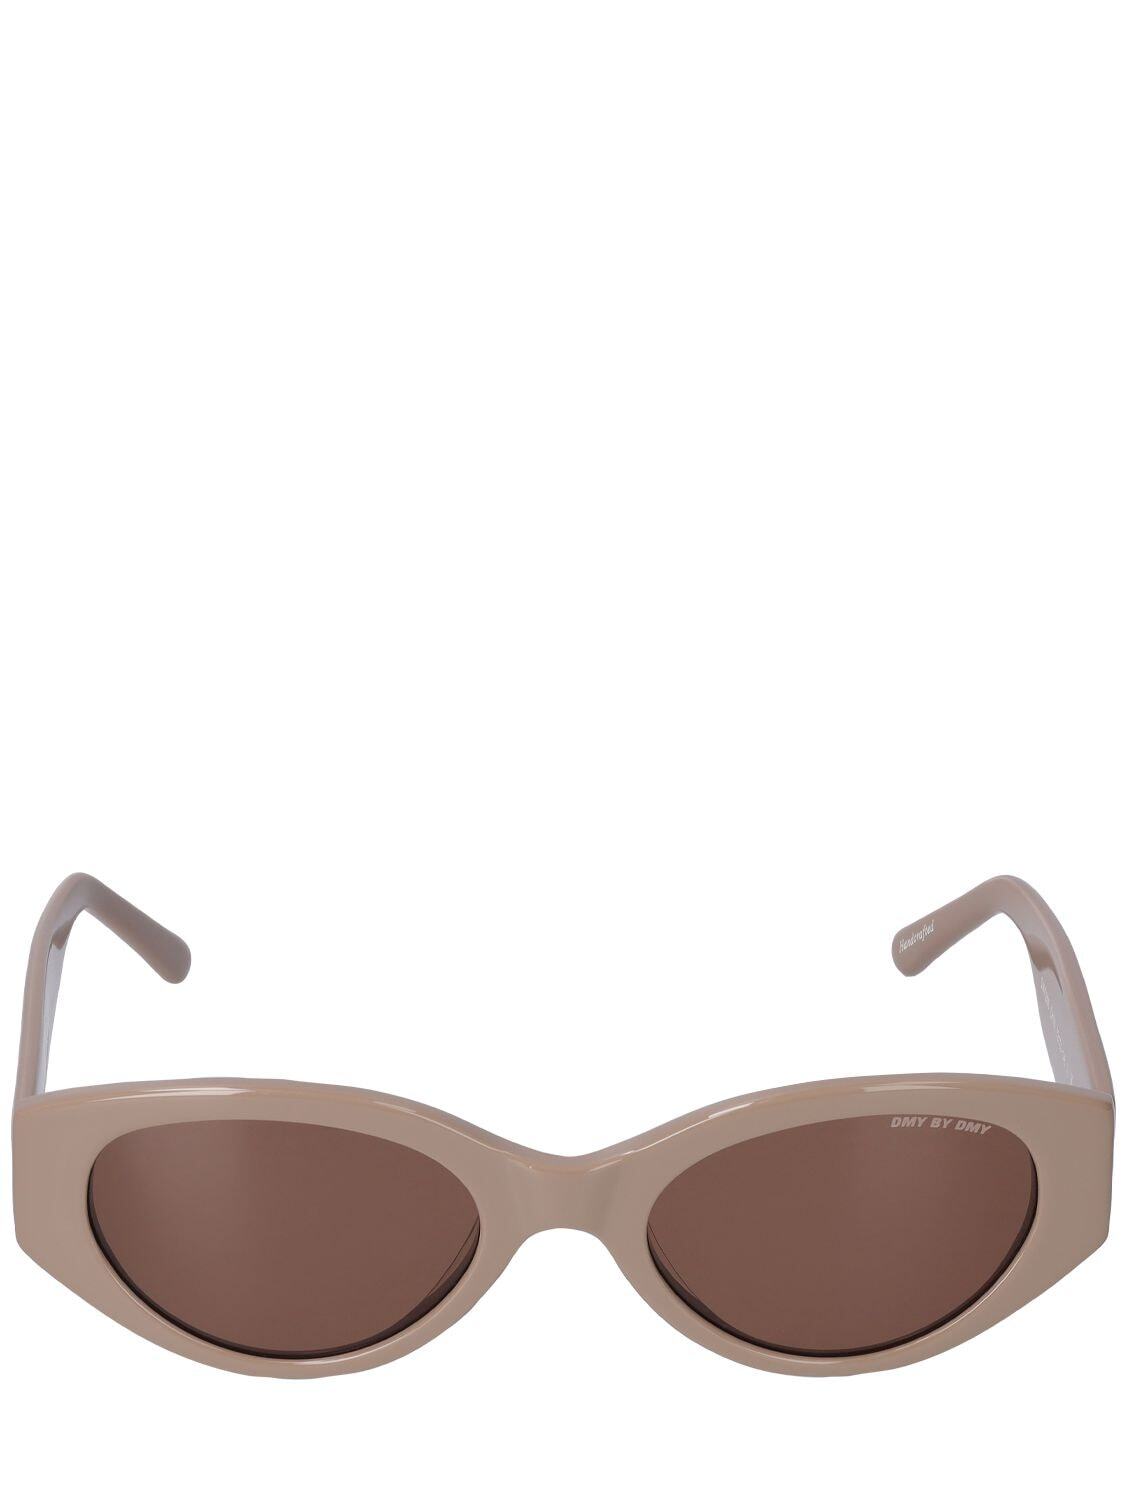 DMY BY DMY Quin Round Acetate Sunglasses in brown / sand